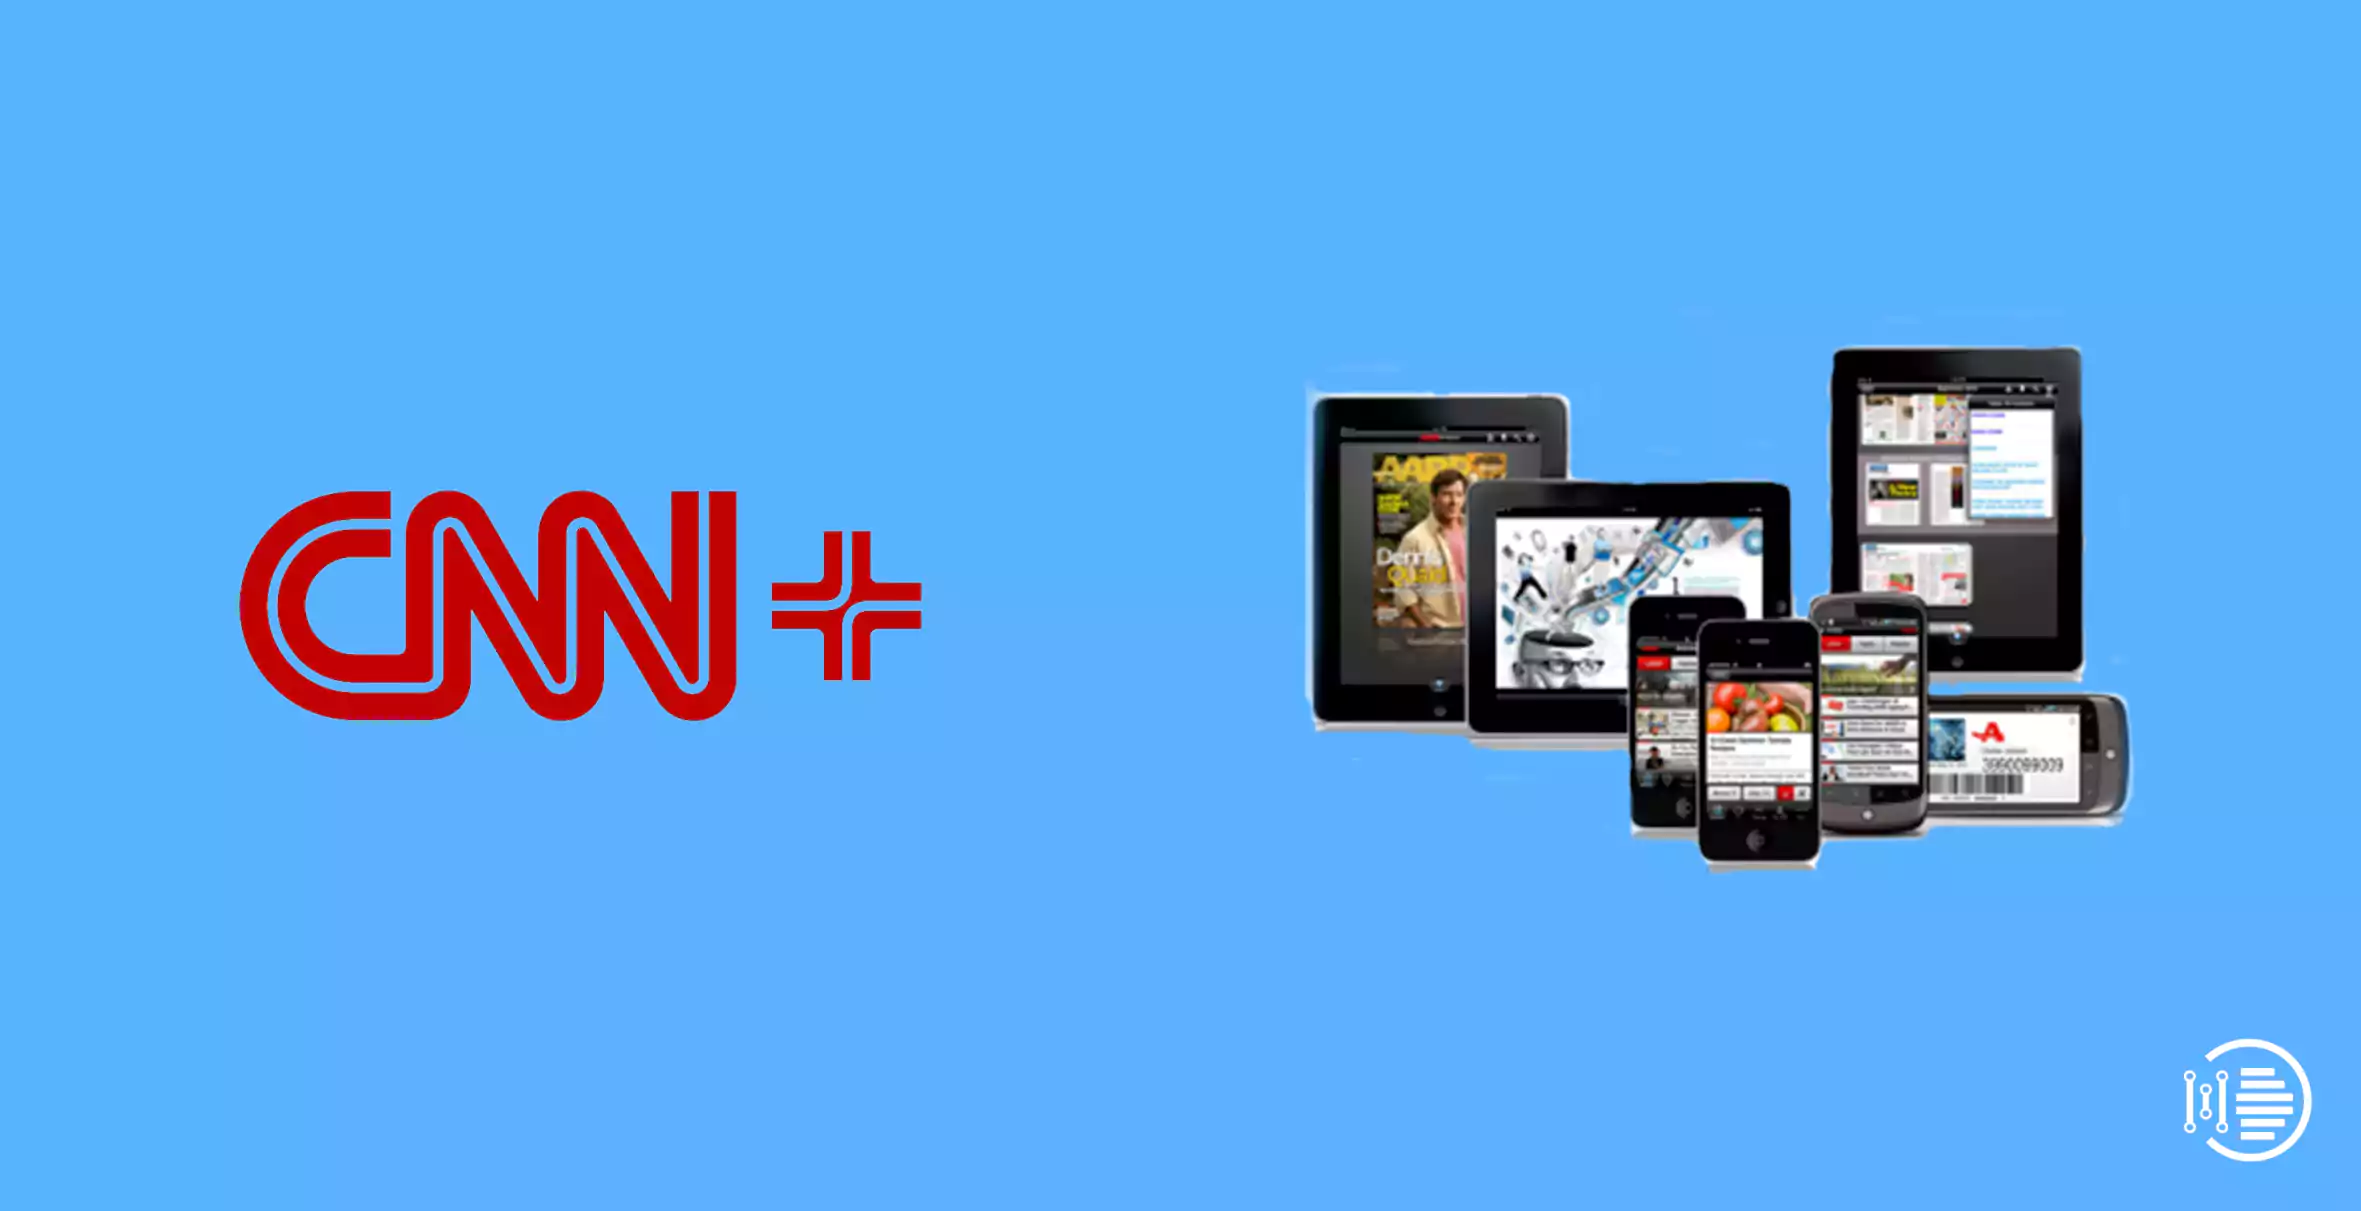 How to activate CNN plus on all smart Devices in 2022